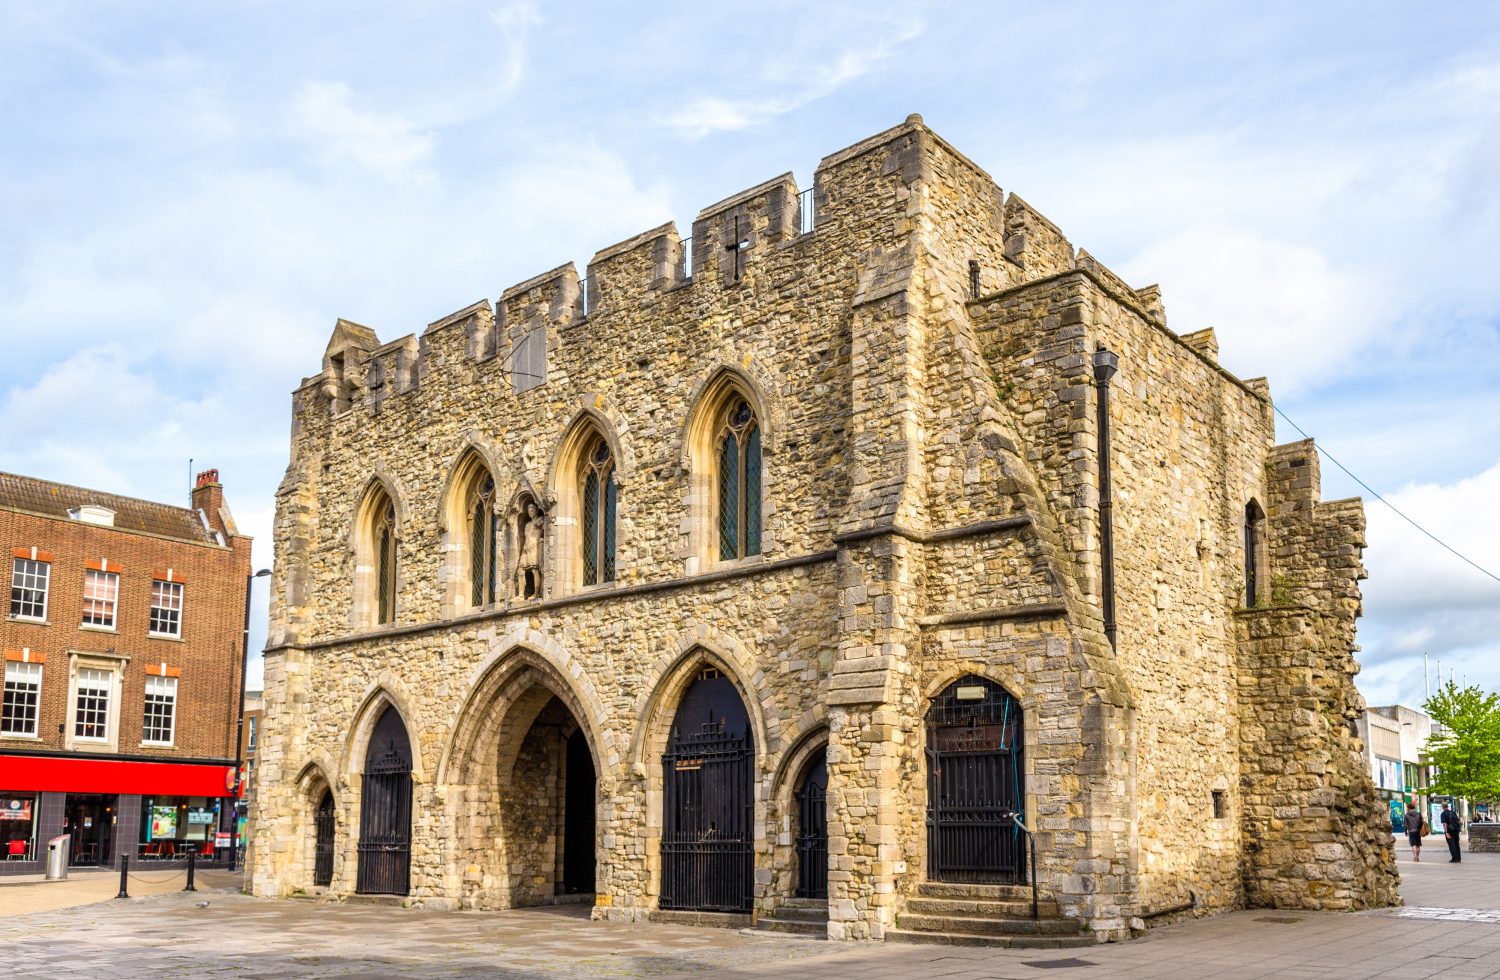 An image depicted the Southampton Bargate historic structure in the city centre of Southampton